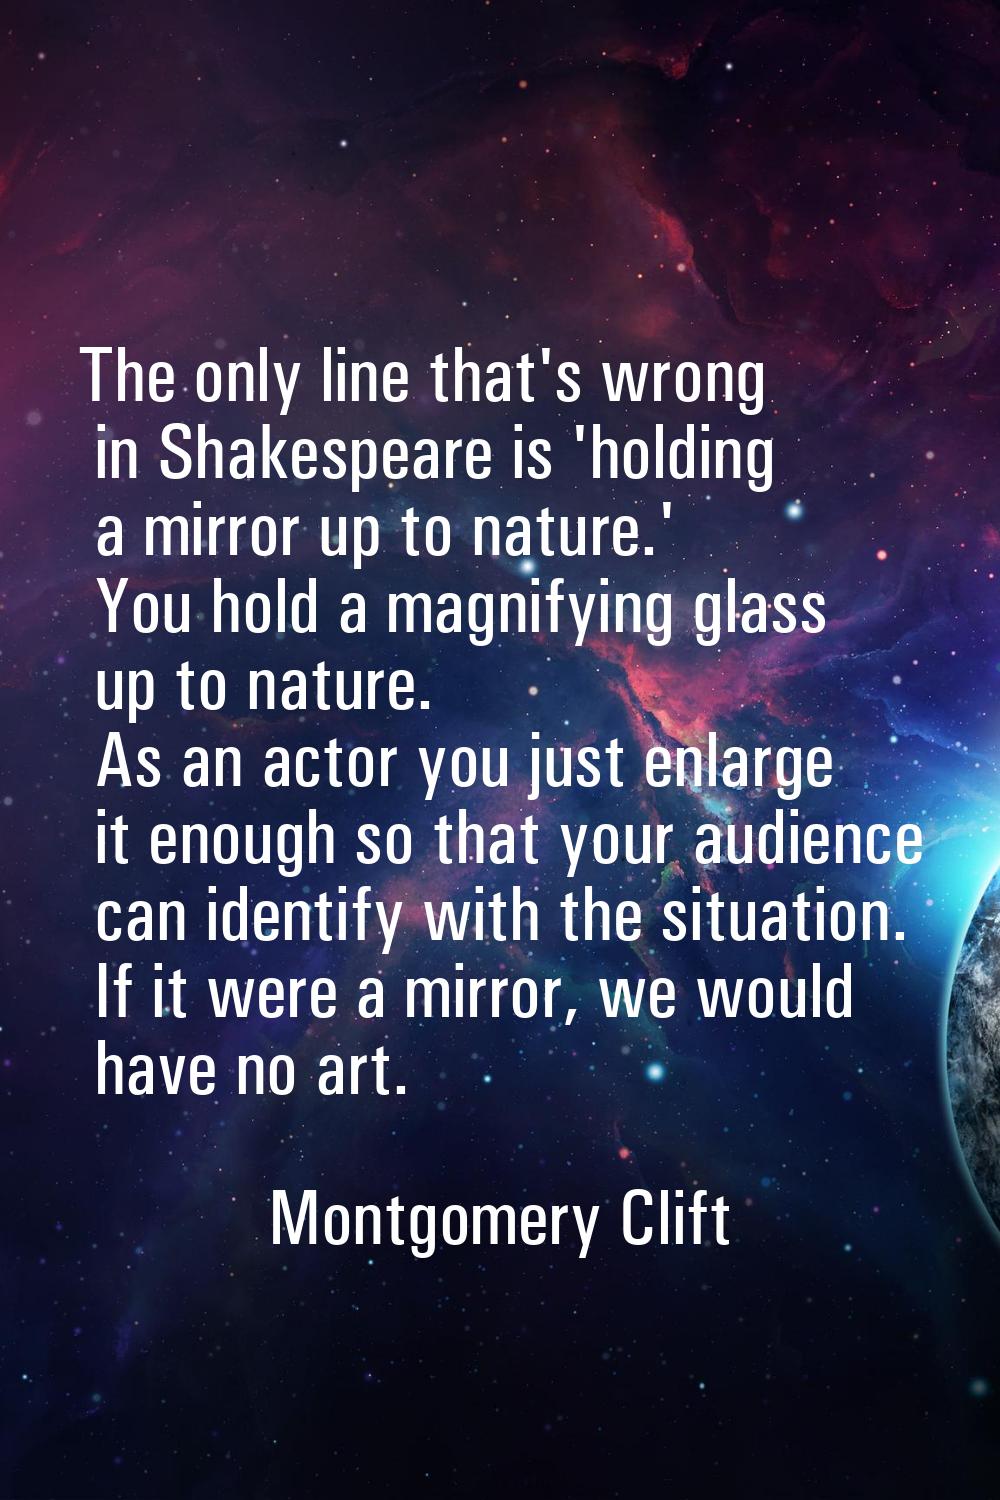 The only line that's wrong in Shakespeare is 'holding a mirror up to nature.' You hold a magnifying